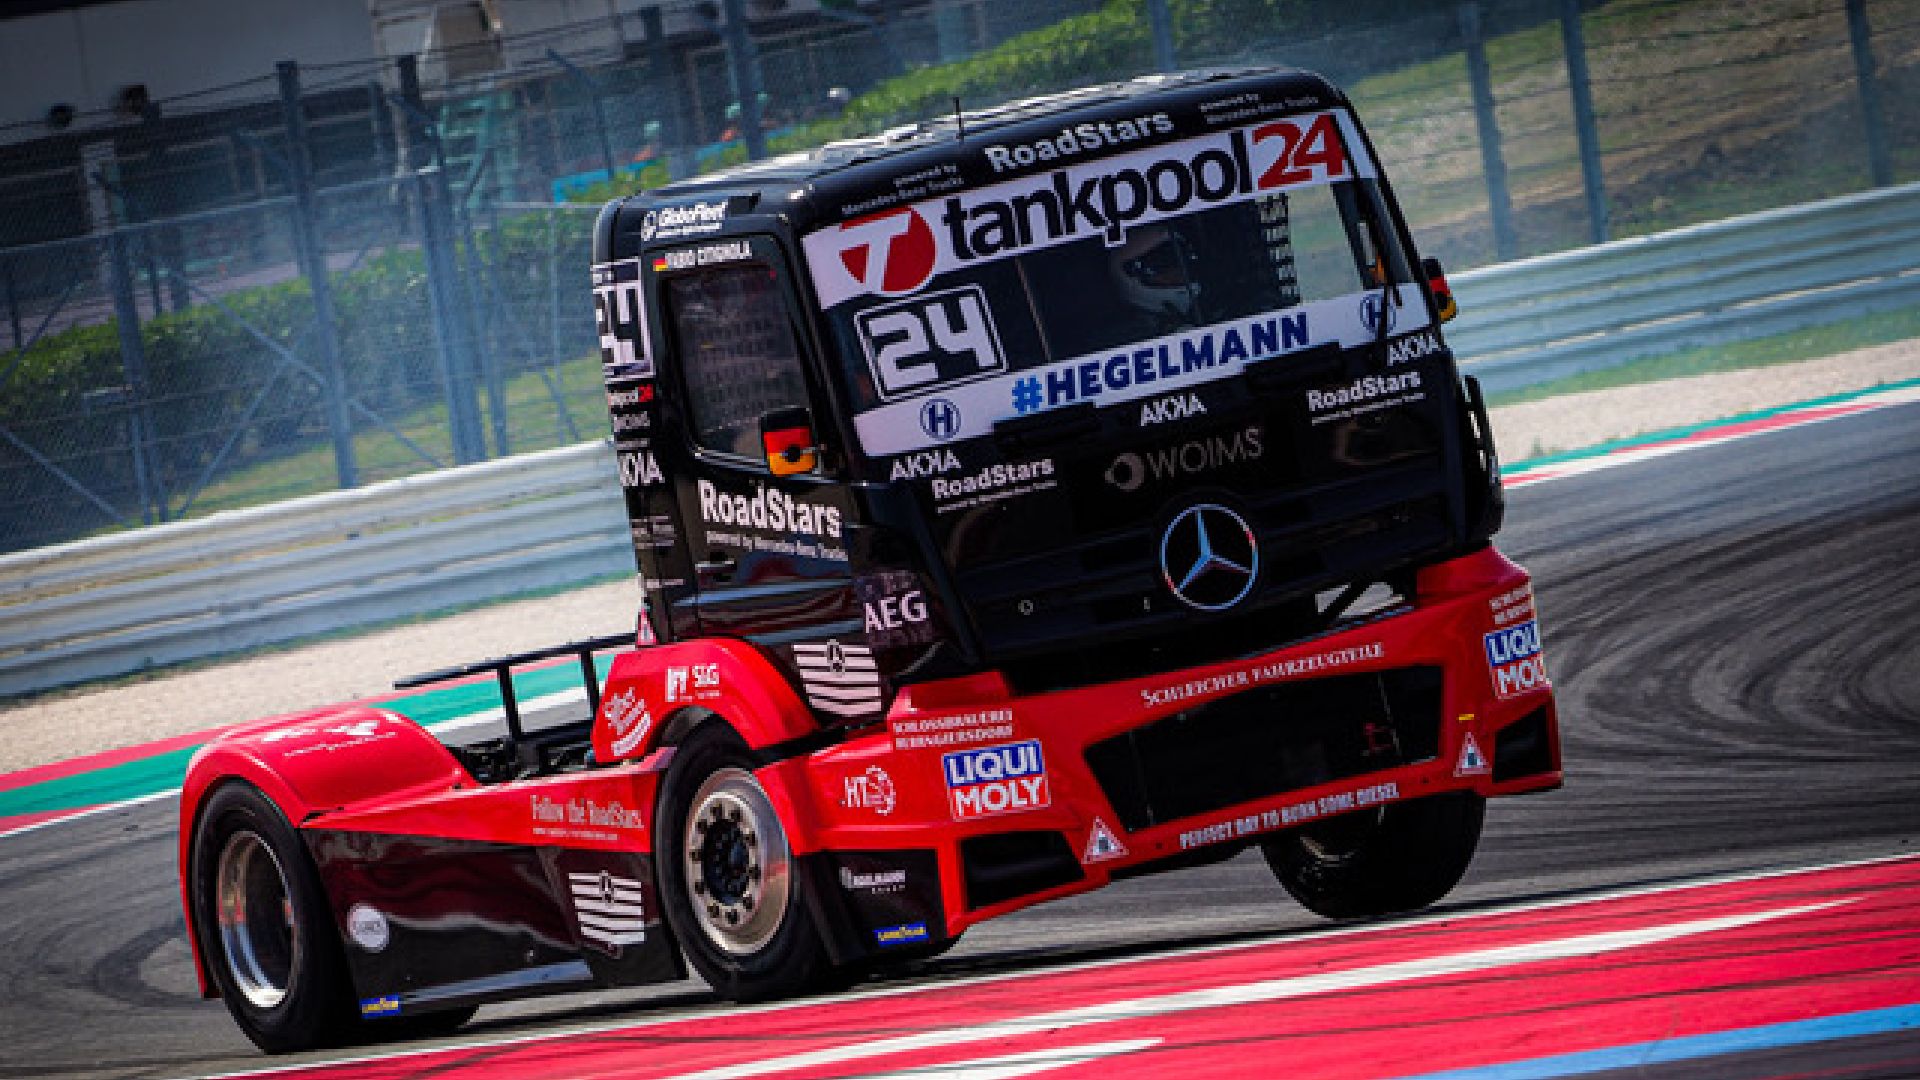 The Grand Prix Truck arrives in Misano for the last round of the season.